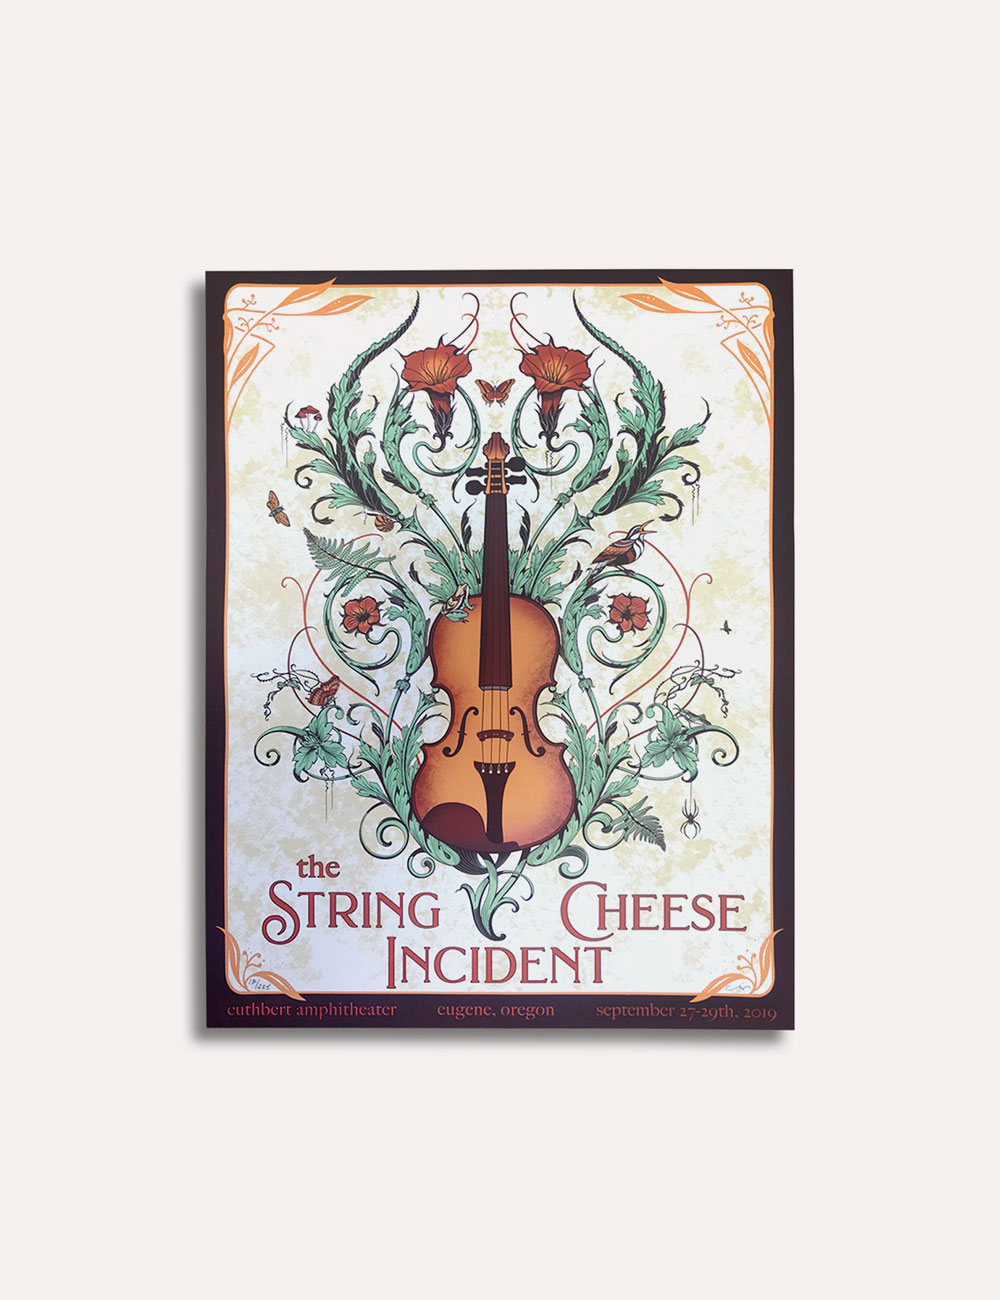 The String Cheese Incident - Merch - Poster - 2019 Eugene Oregon Cuthbert